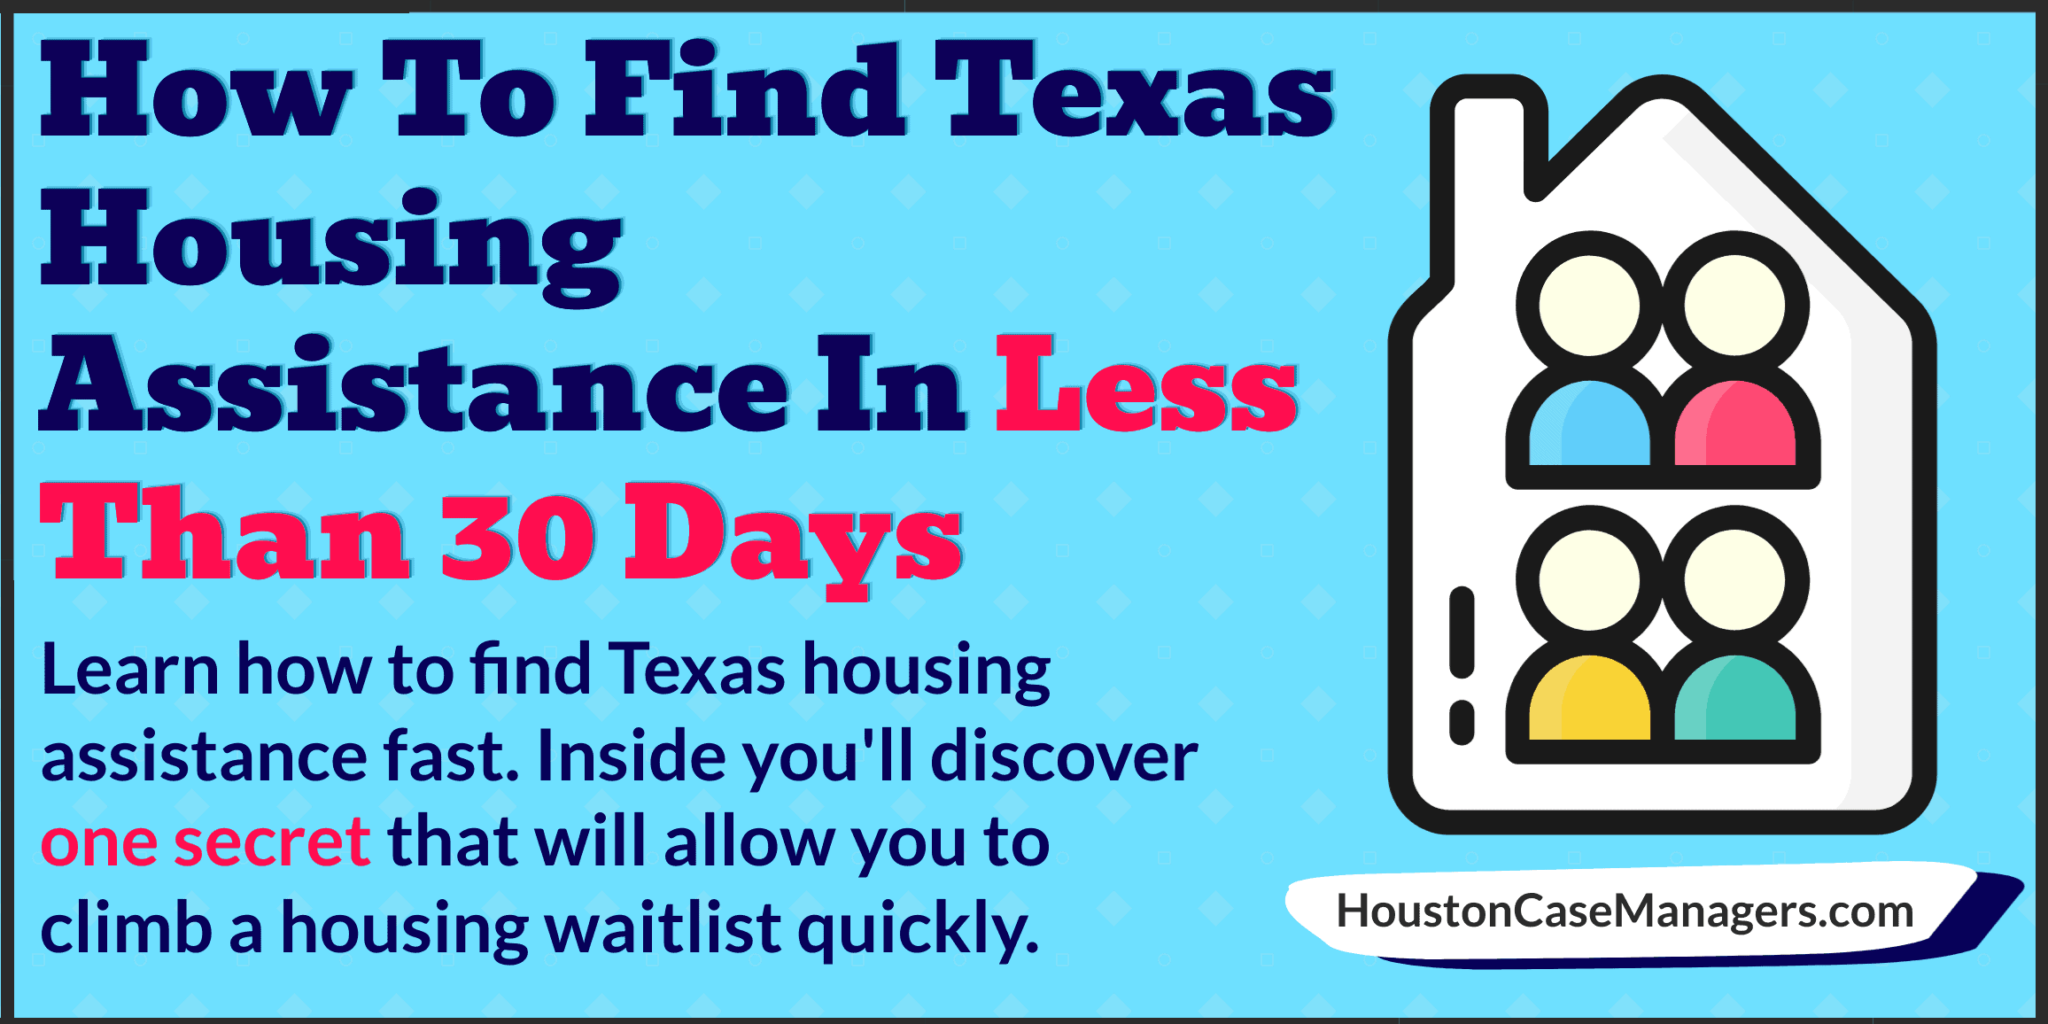 How To Find Texas Housing Assistance In Less Than 30 Days